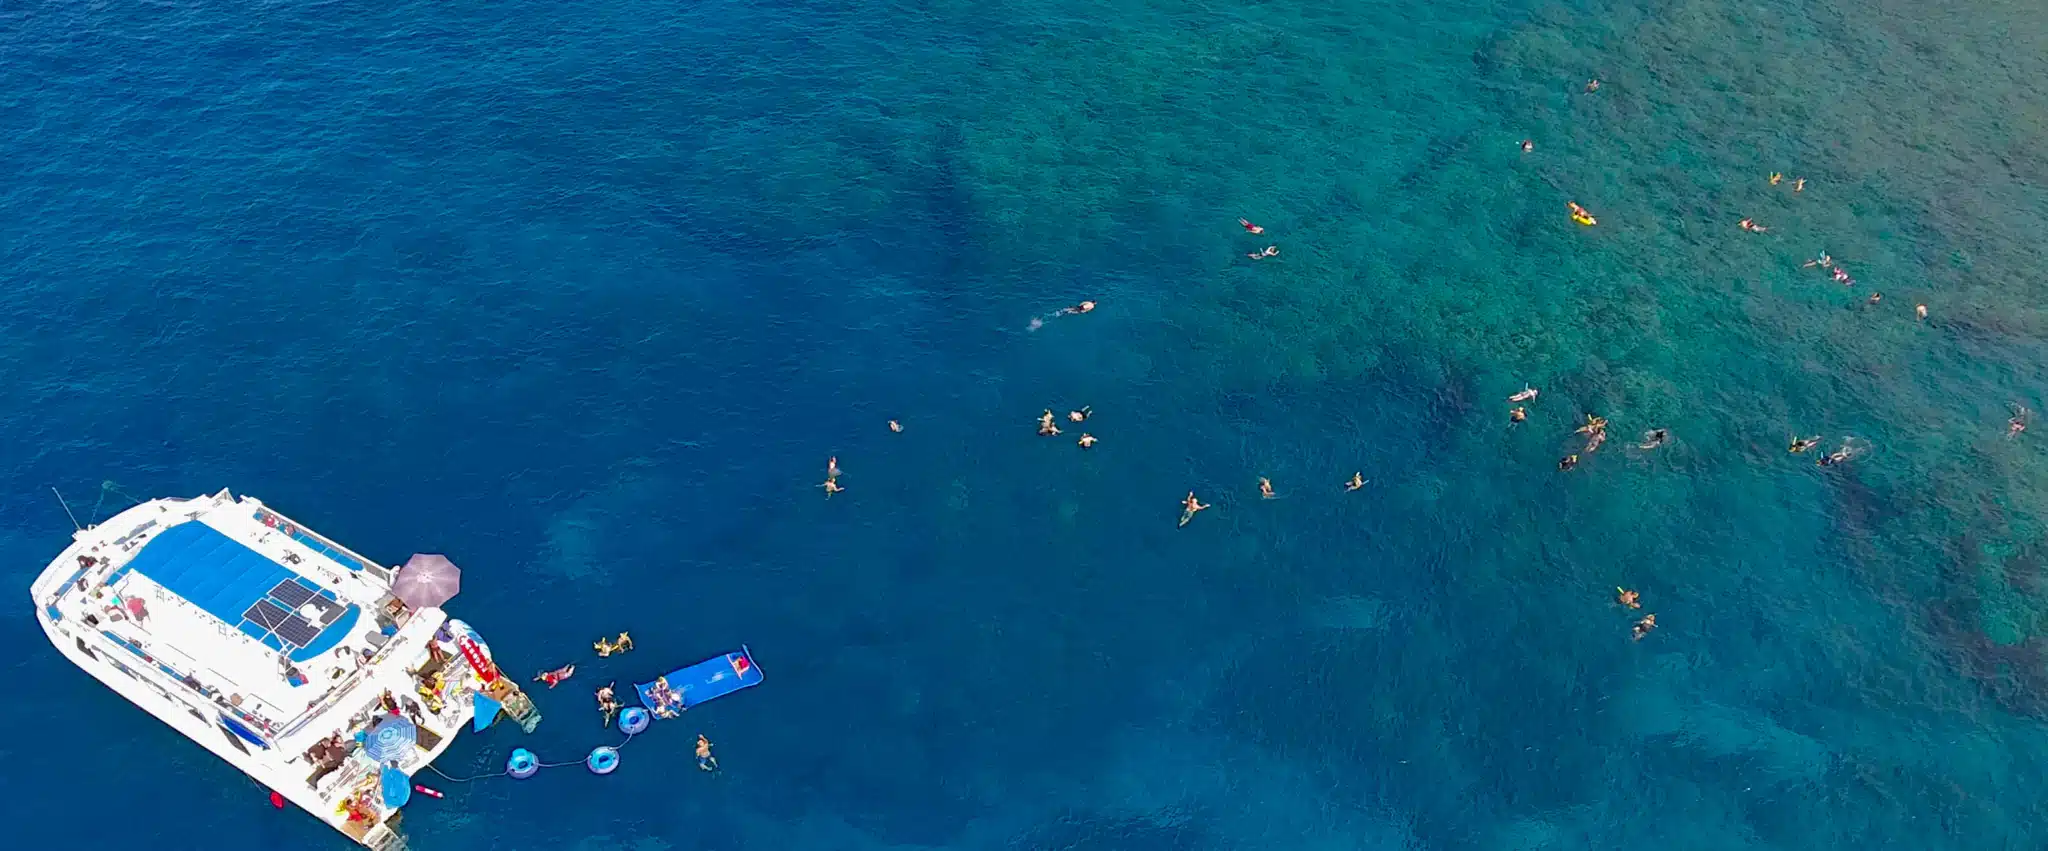 Deluxe Snorkel & Dolphin Watch is a Water Activity located in the city of Kailua-Kona on Big Island, Hawaii